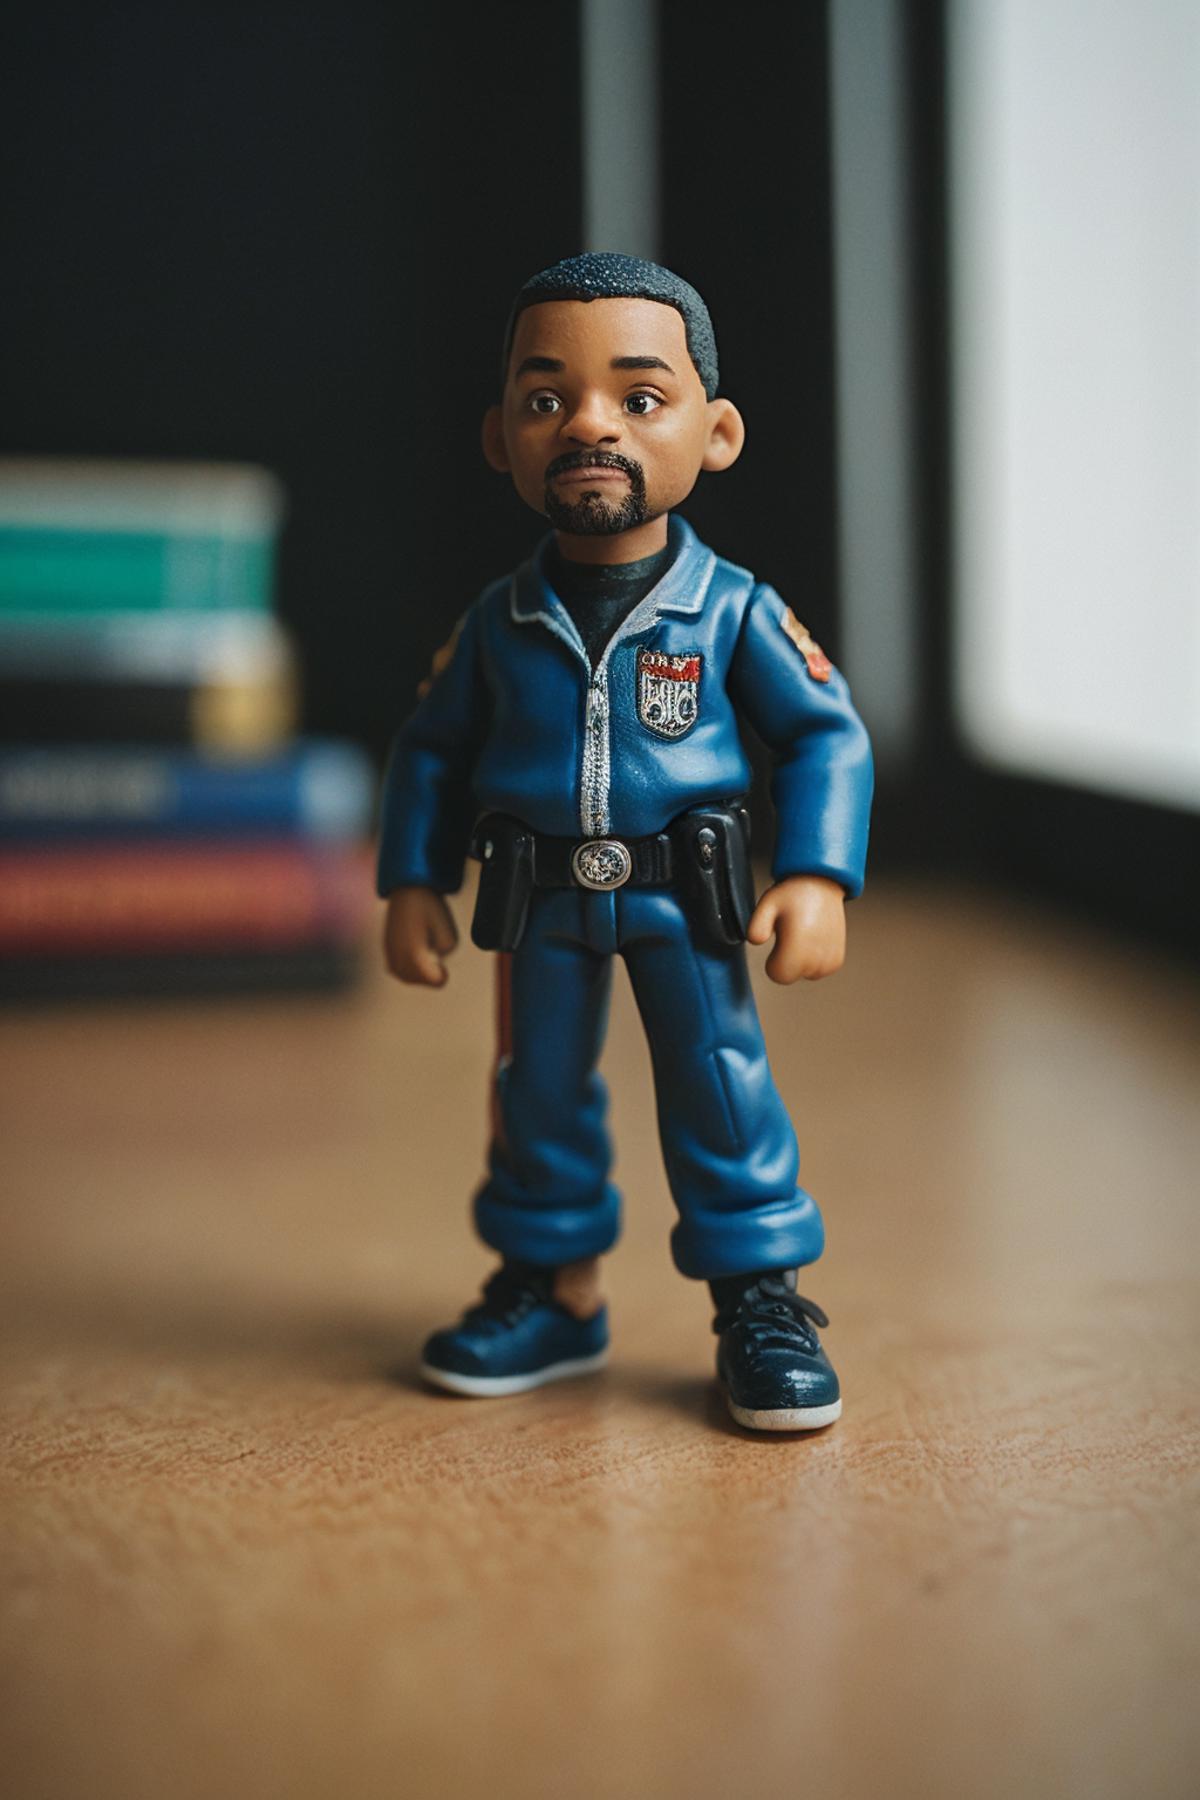 A Blue Action Figure on a Table